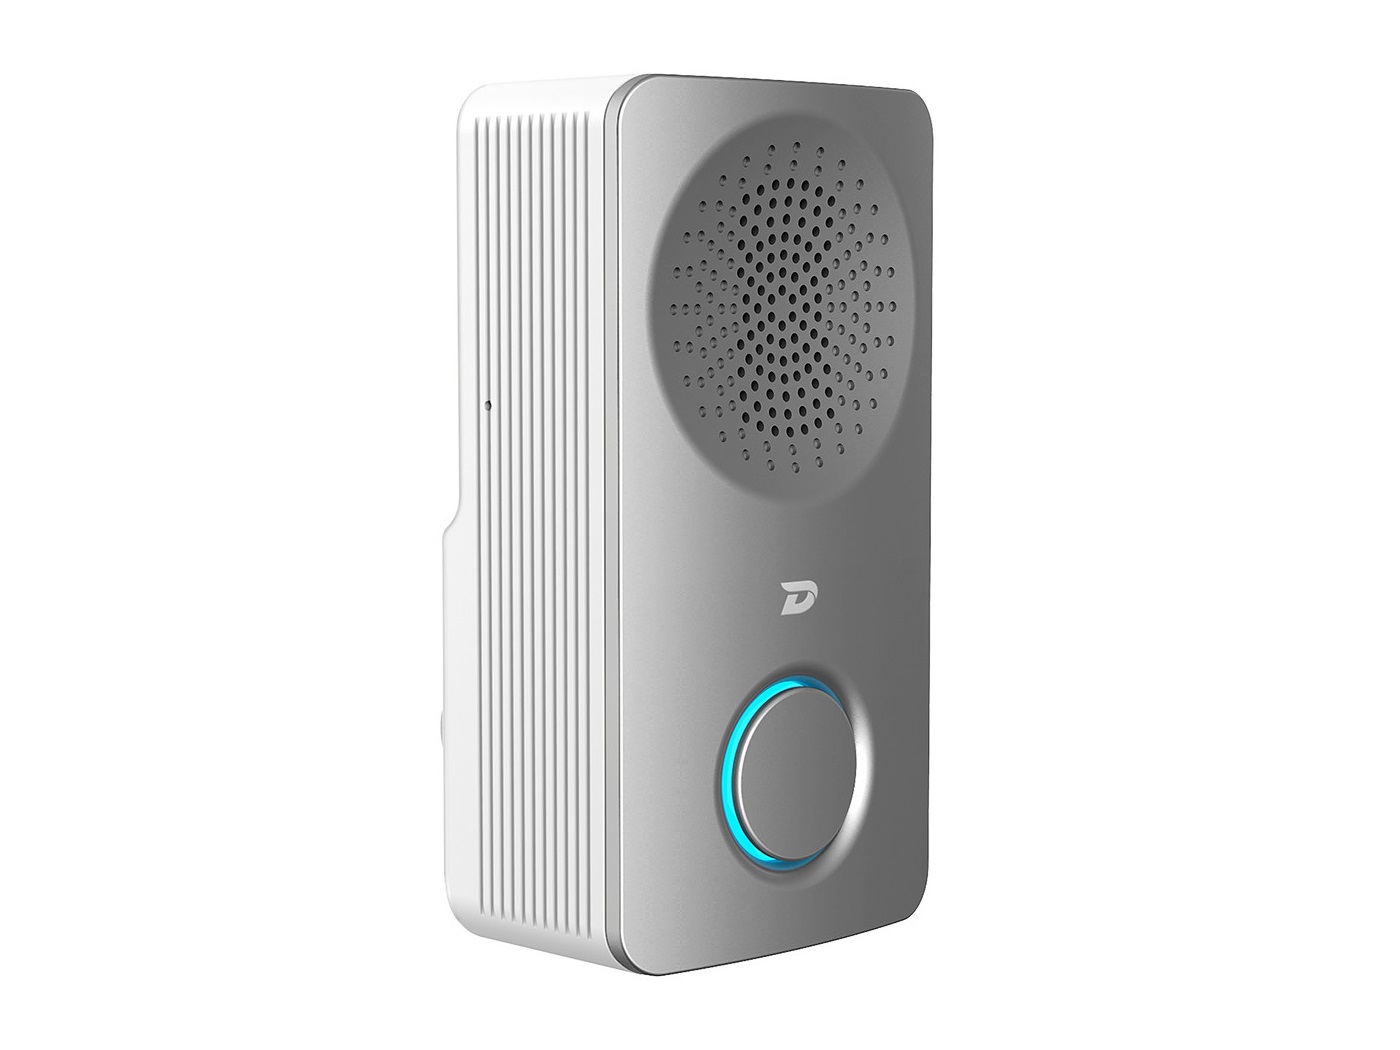 Singer Wireless Door Chime For DINGER With Multiple Ringtones Options by ICRealtime